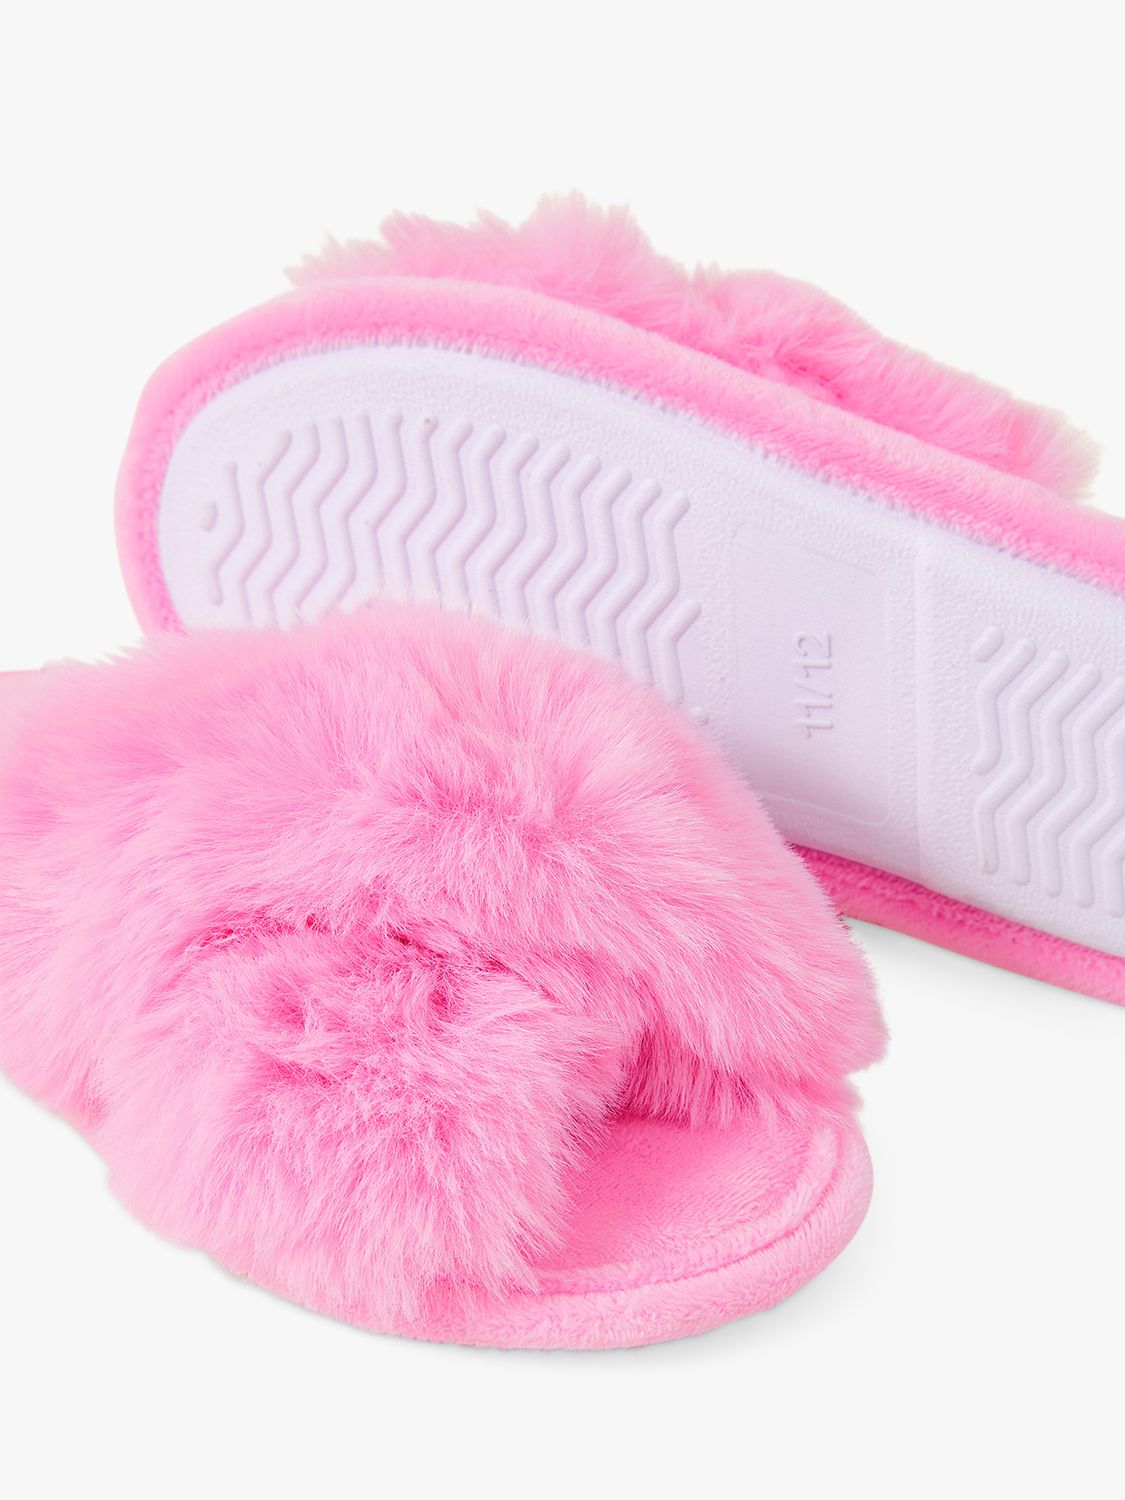 Angels by Accessorize Kids' Faux Fur Sliders, Pink, 11-12 Jnr